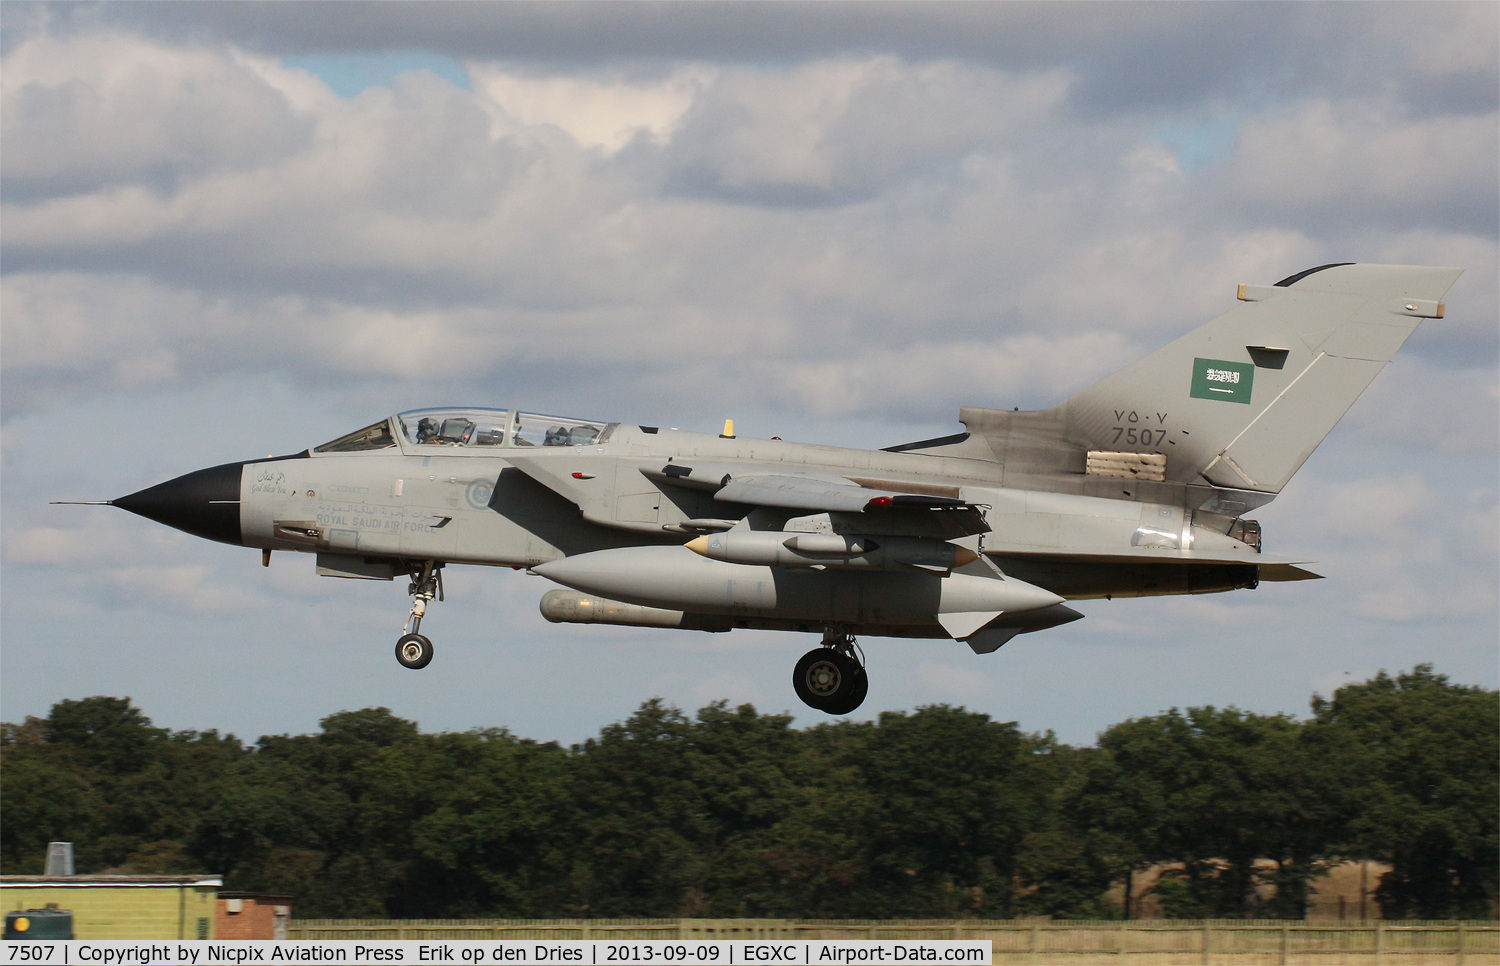 7507, 1997 Panavia Tornado IDS C/N 949/CS044/3490, 7507 seen here upon recovery into RAF Coningsby.